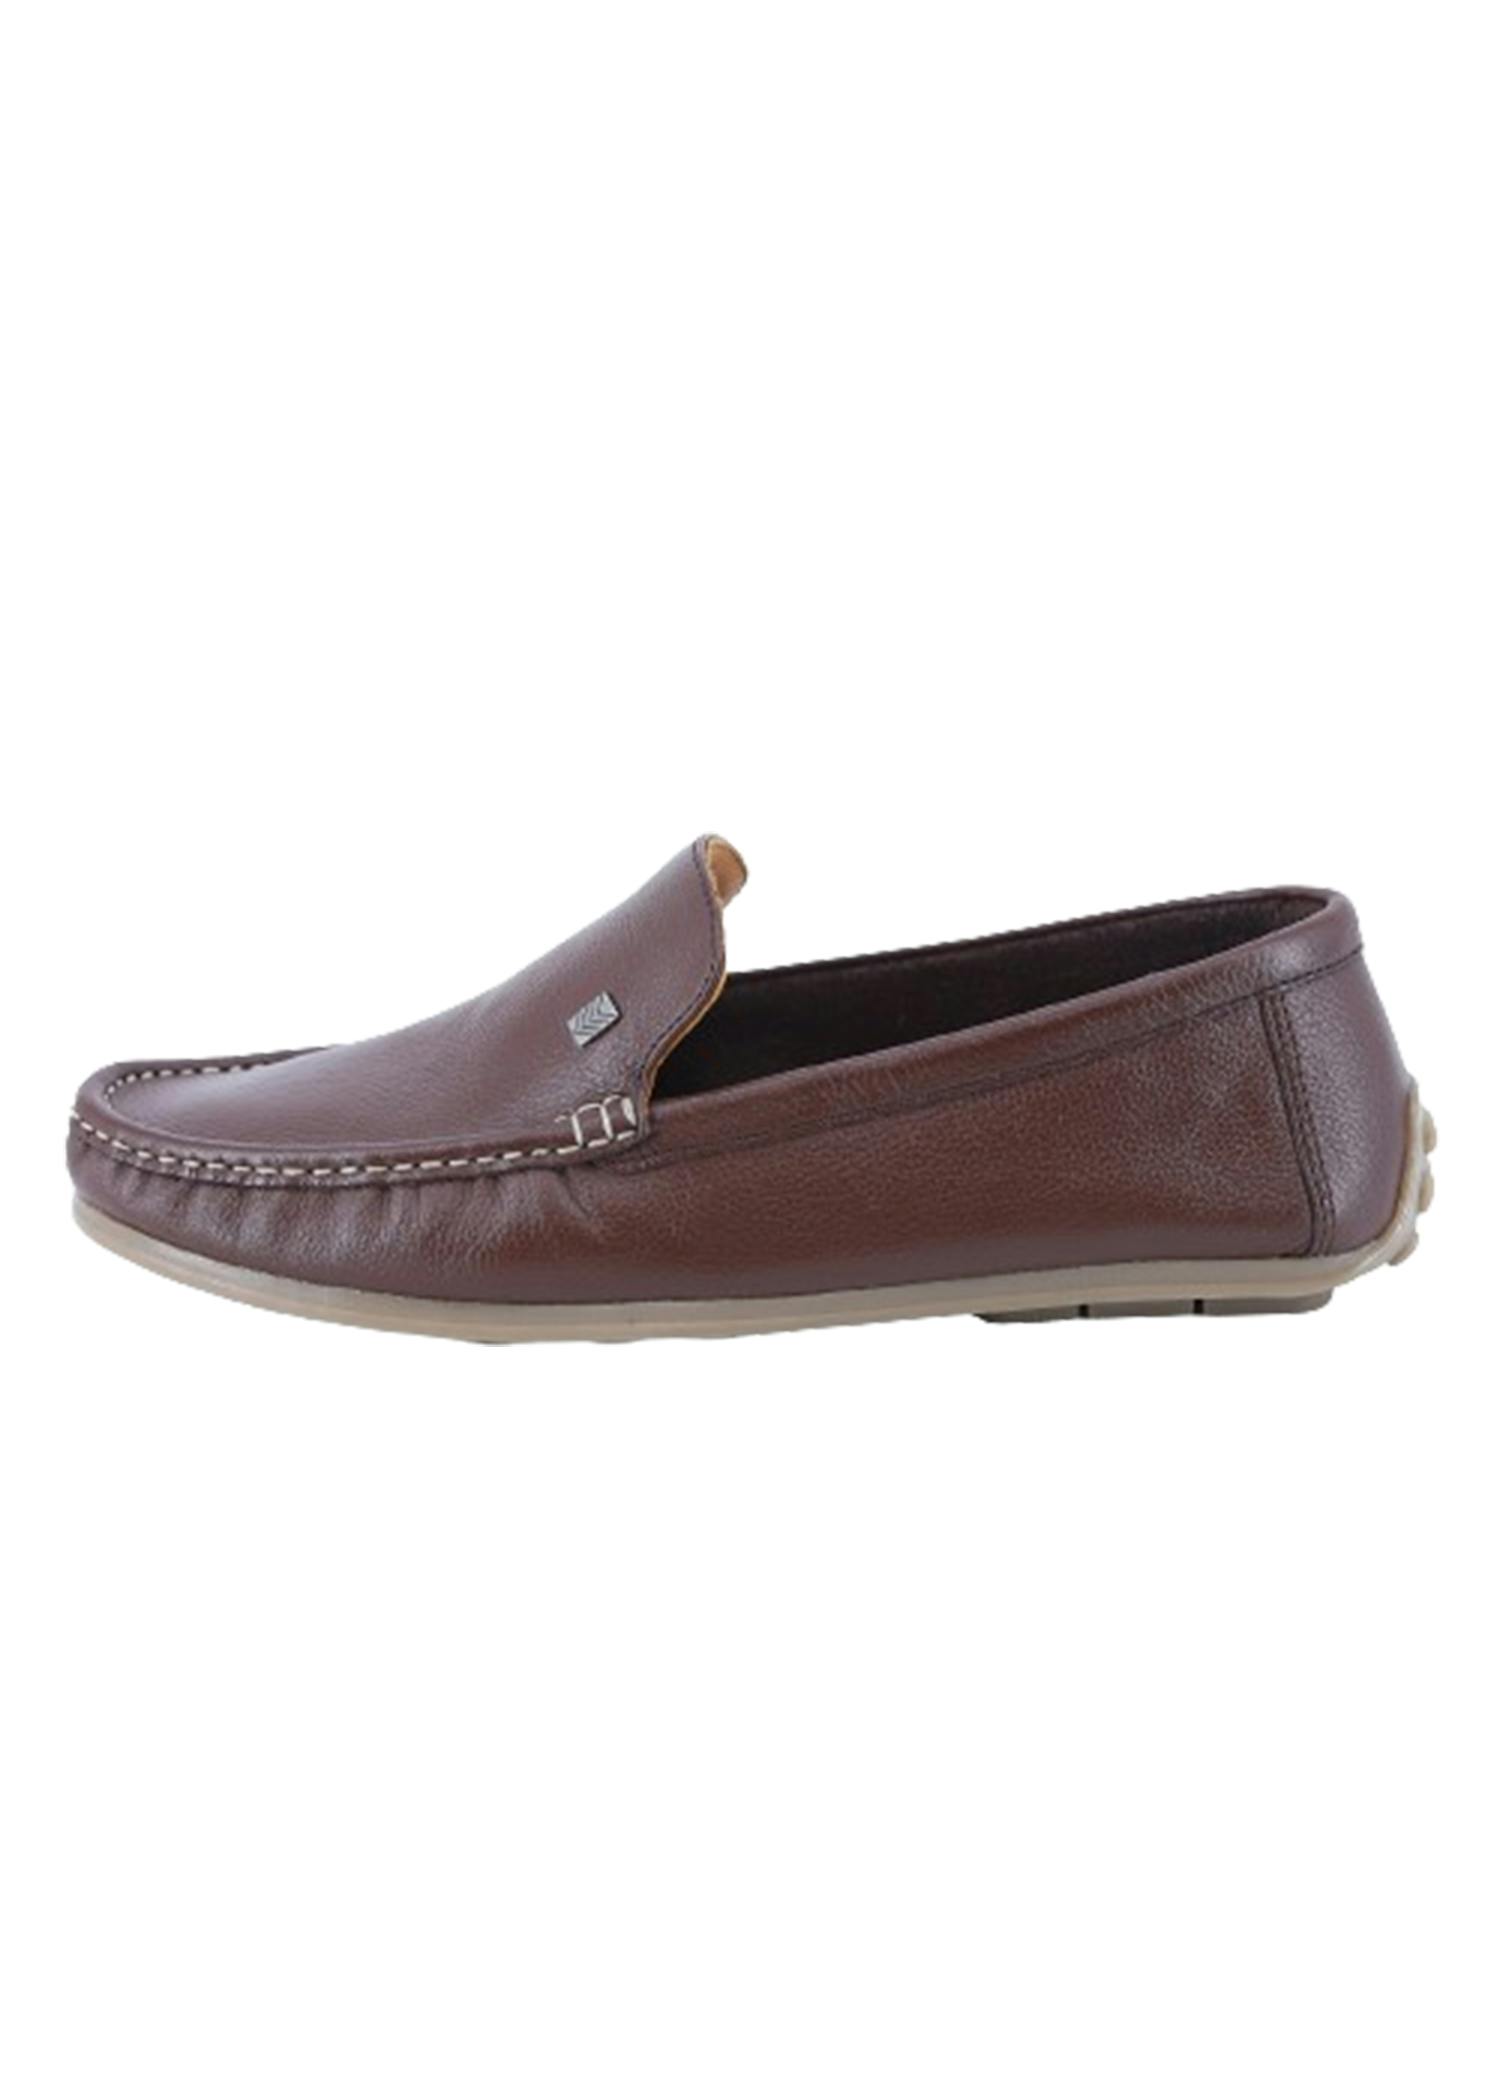 deer mens shoes brown color cover